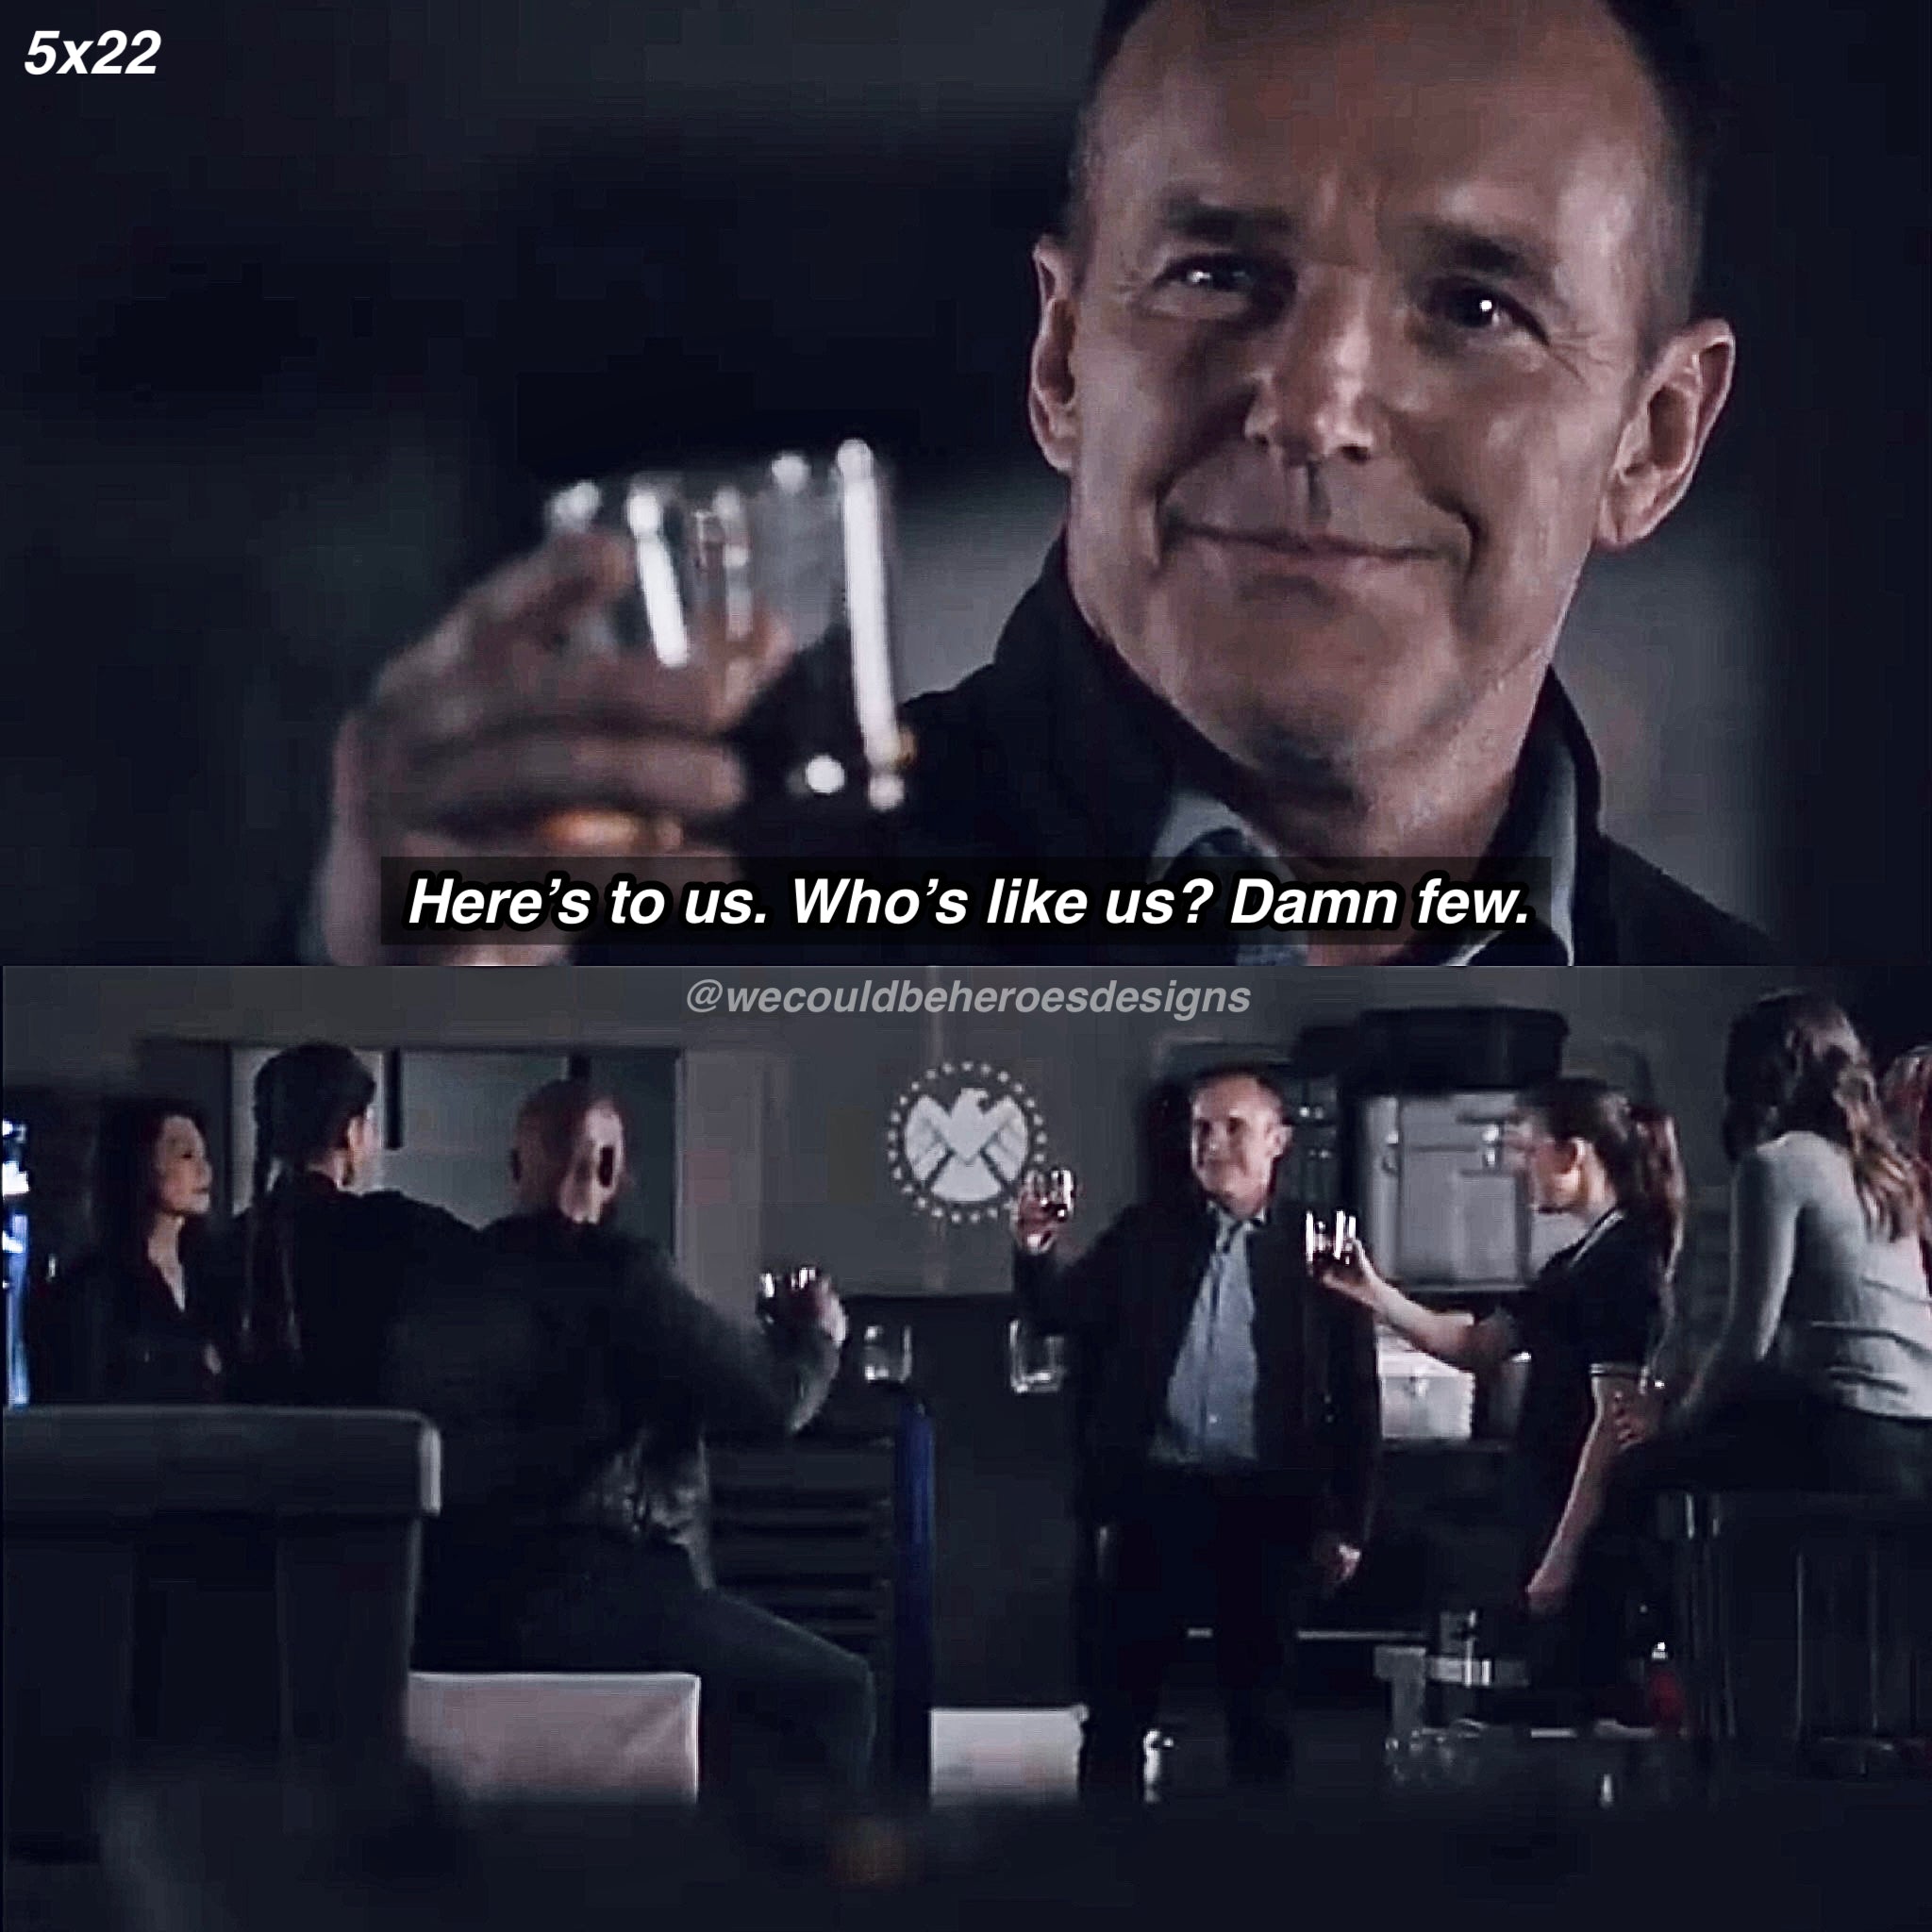 Marvel’s Agents of S.H.I.E.L.D. Phil Coulson Season 5 Episode 22 “Who’s Like Us? Damn Few.” Scene Quote